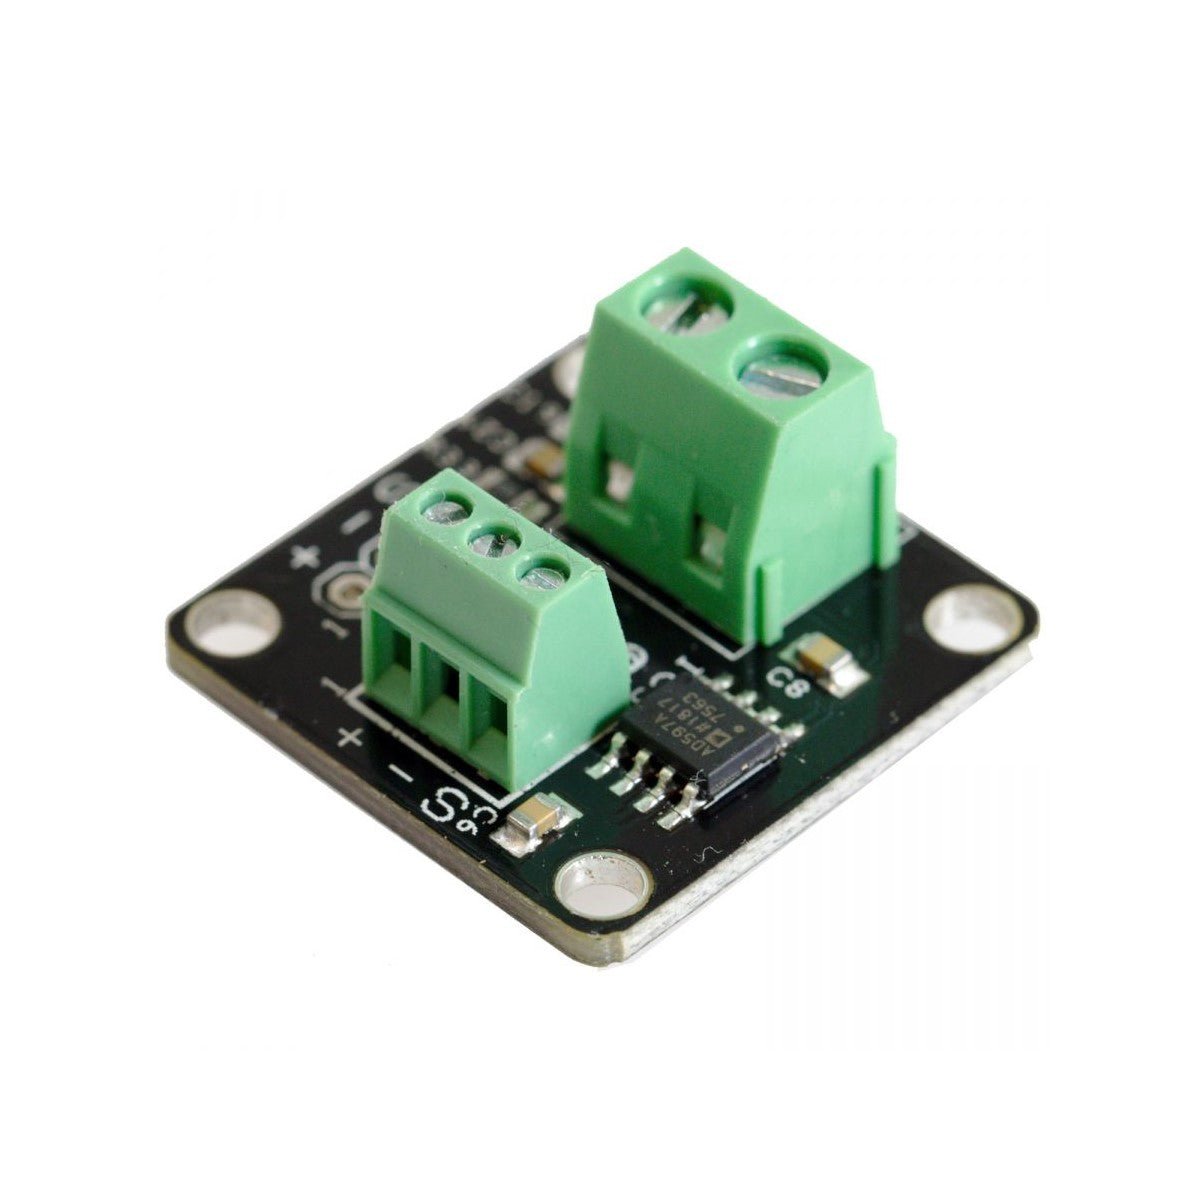 External Thermocouple Breakout Board, Version 1.2